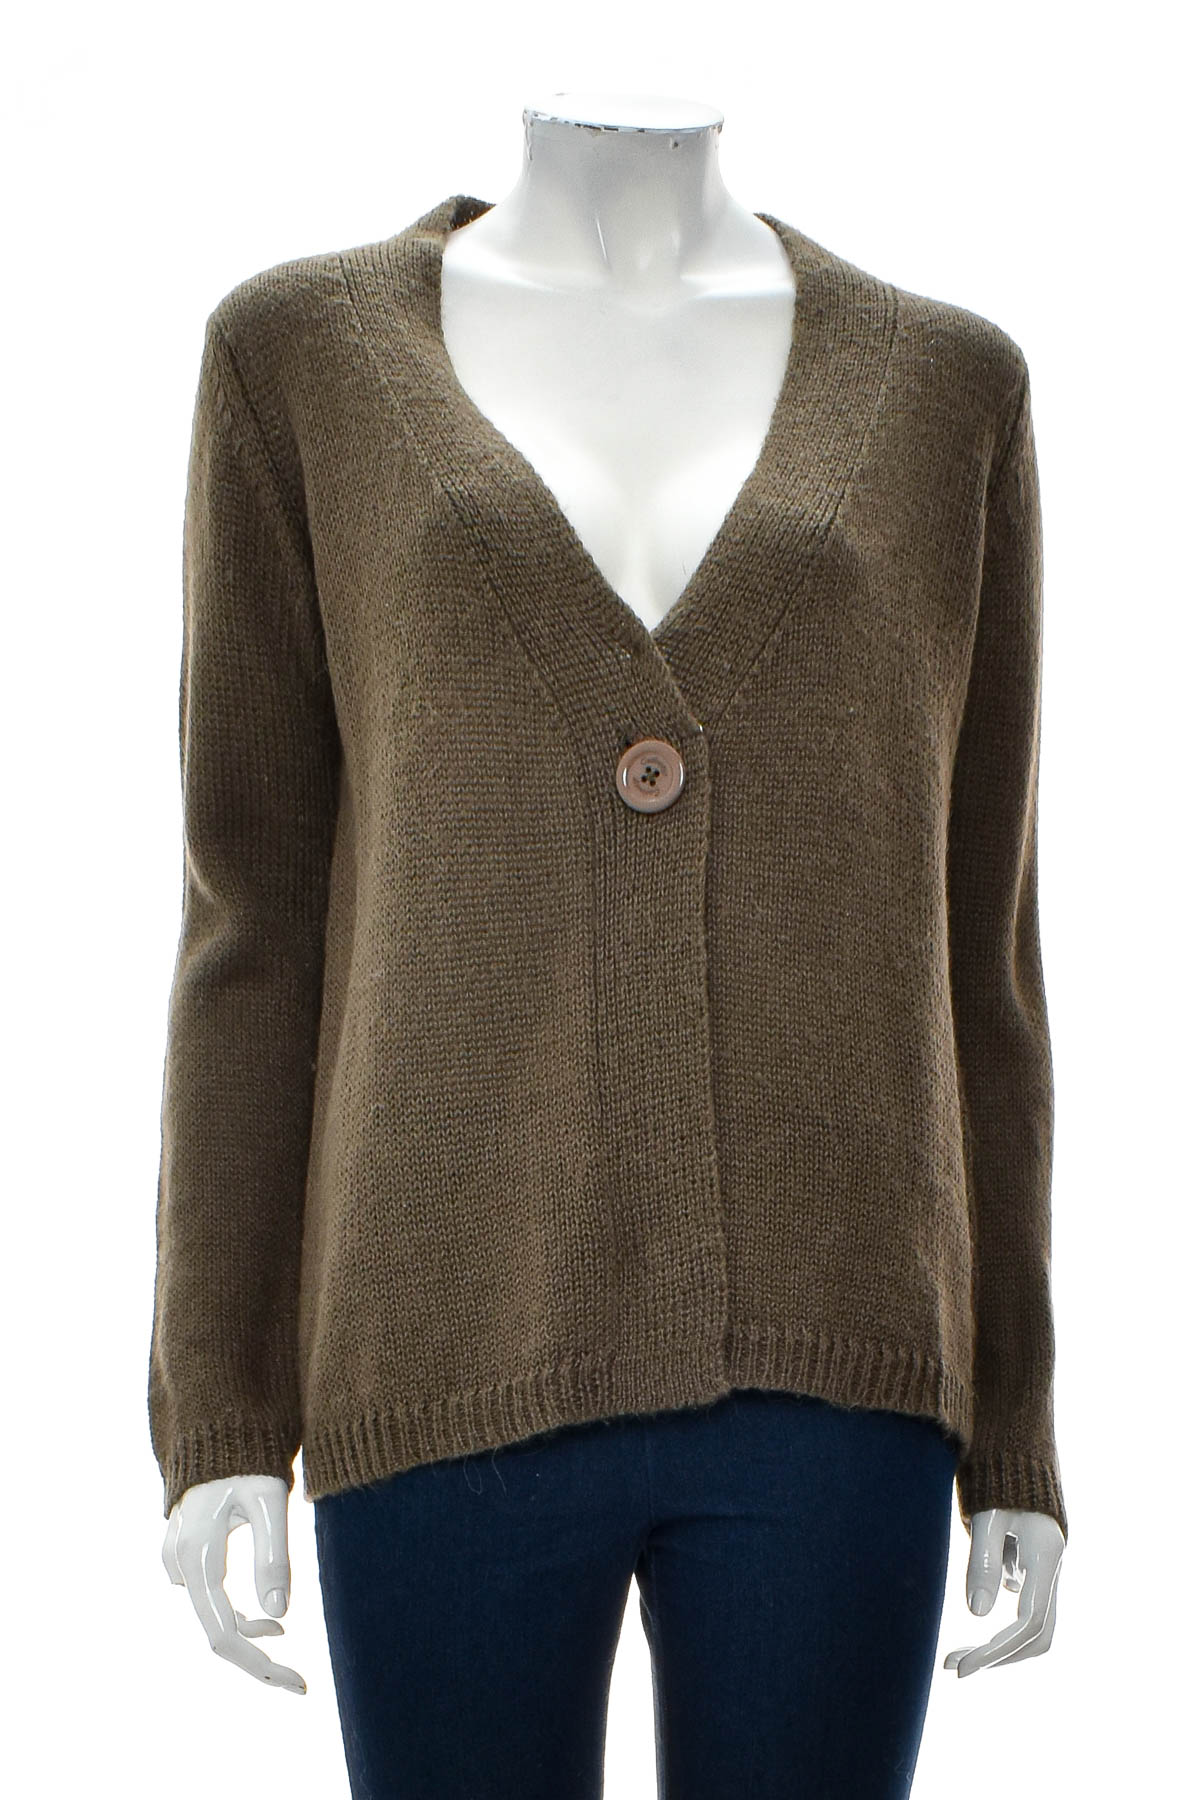 Women's cardigan - Coolwater - 0